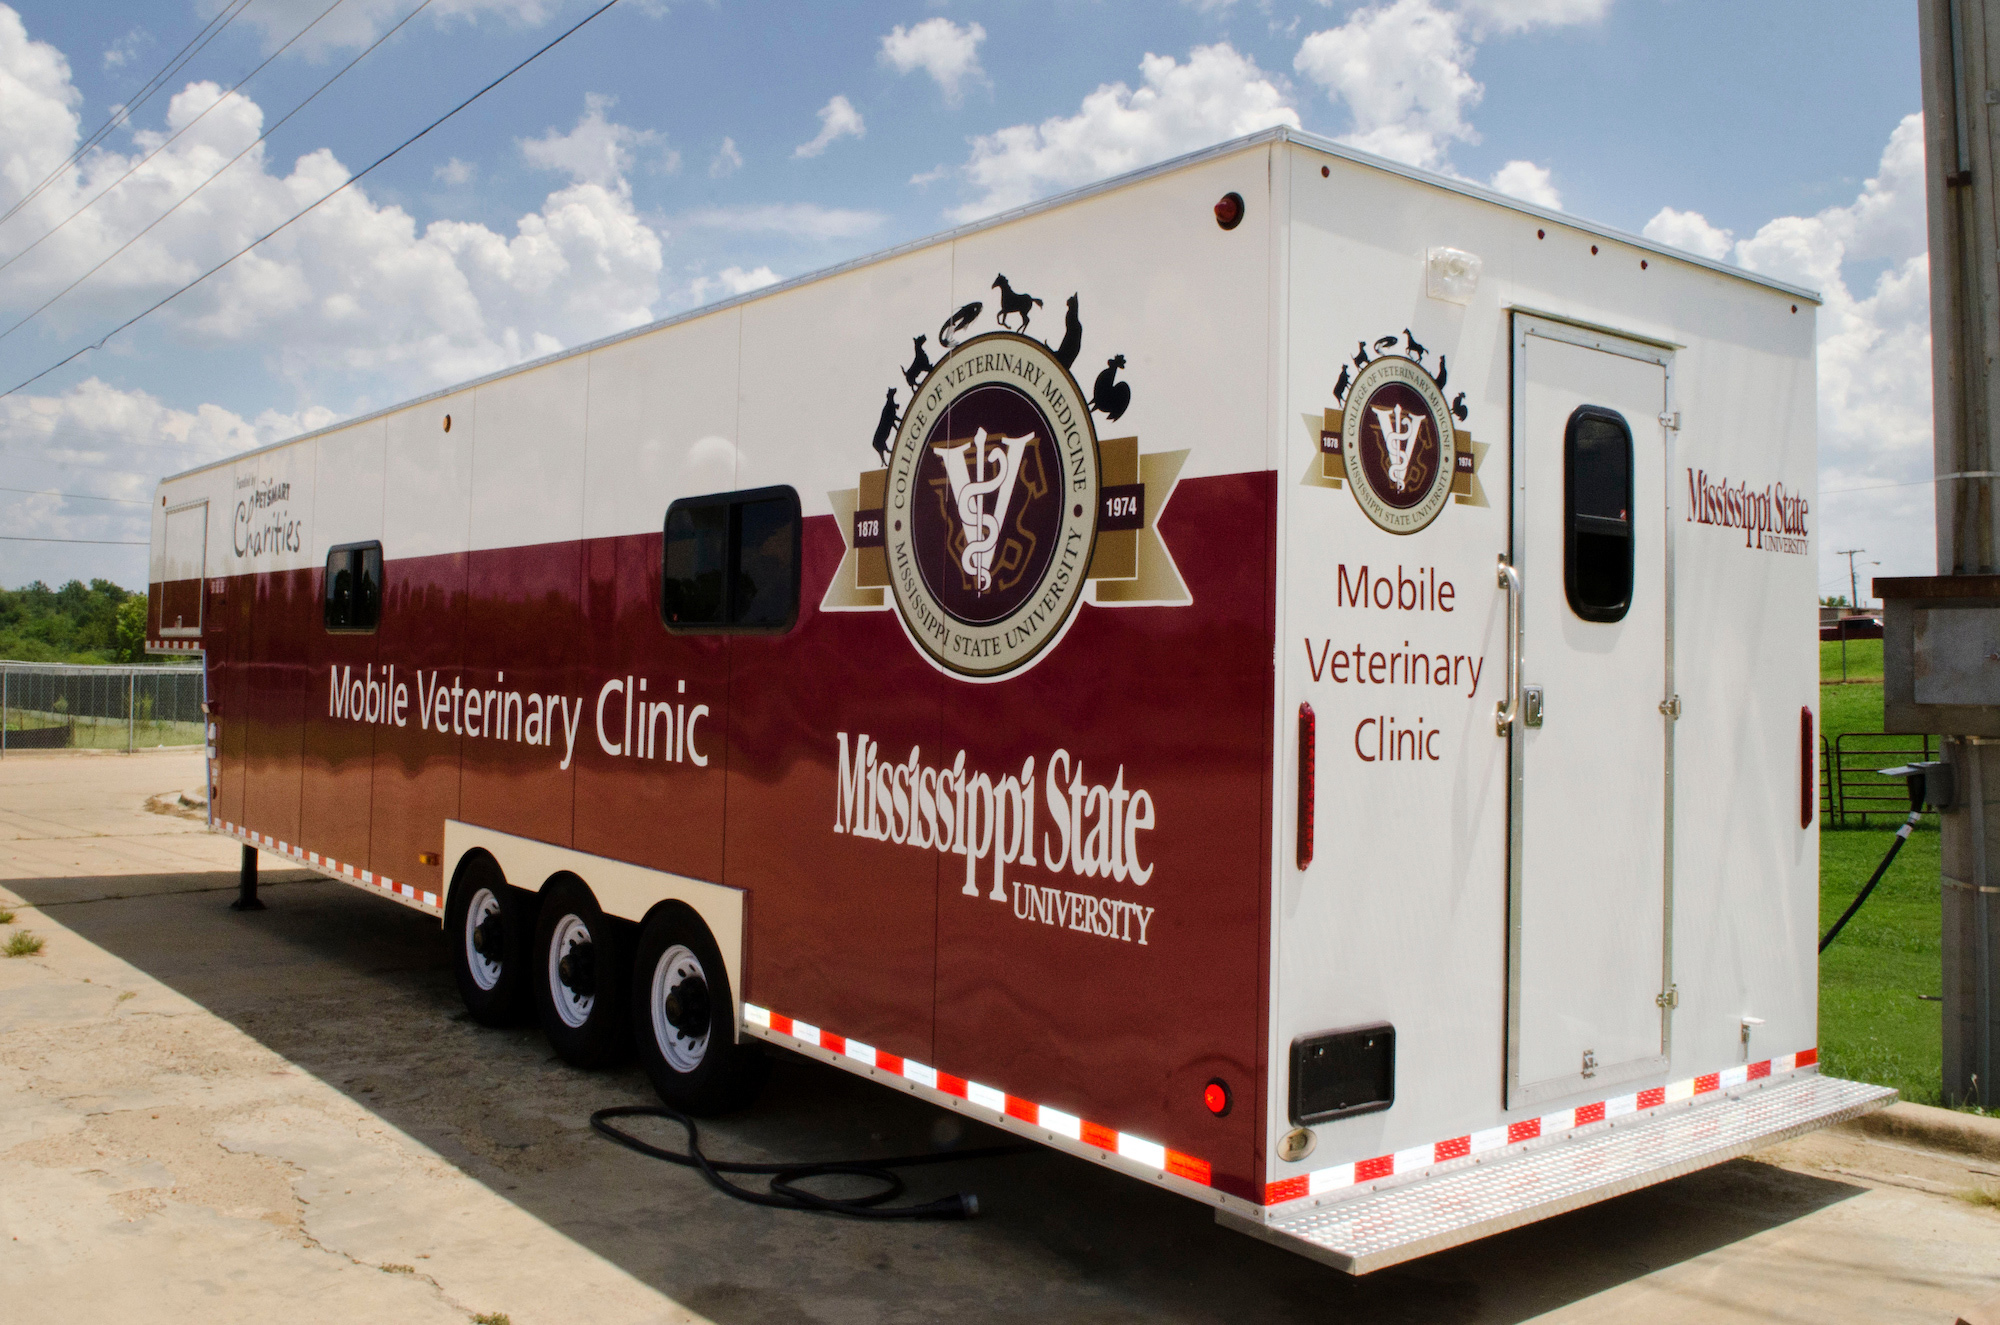 Mississippi State University College of Veterinary Medicine faculty and staff are providing care for working dogs as they assist with the response to the July 10 military plane crash in Leflore County. A mobile veterinary clinic is being used to provide preventative care and treat minor injuries. (Photo by Tom Thompson)